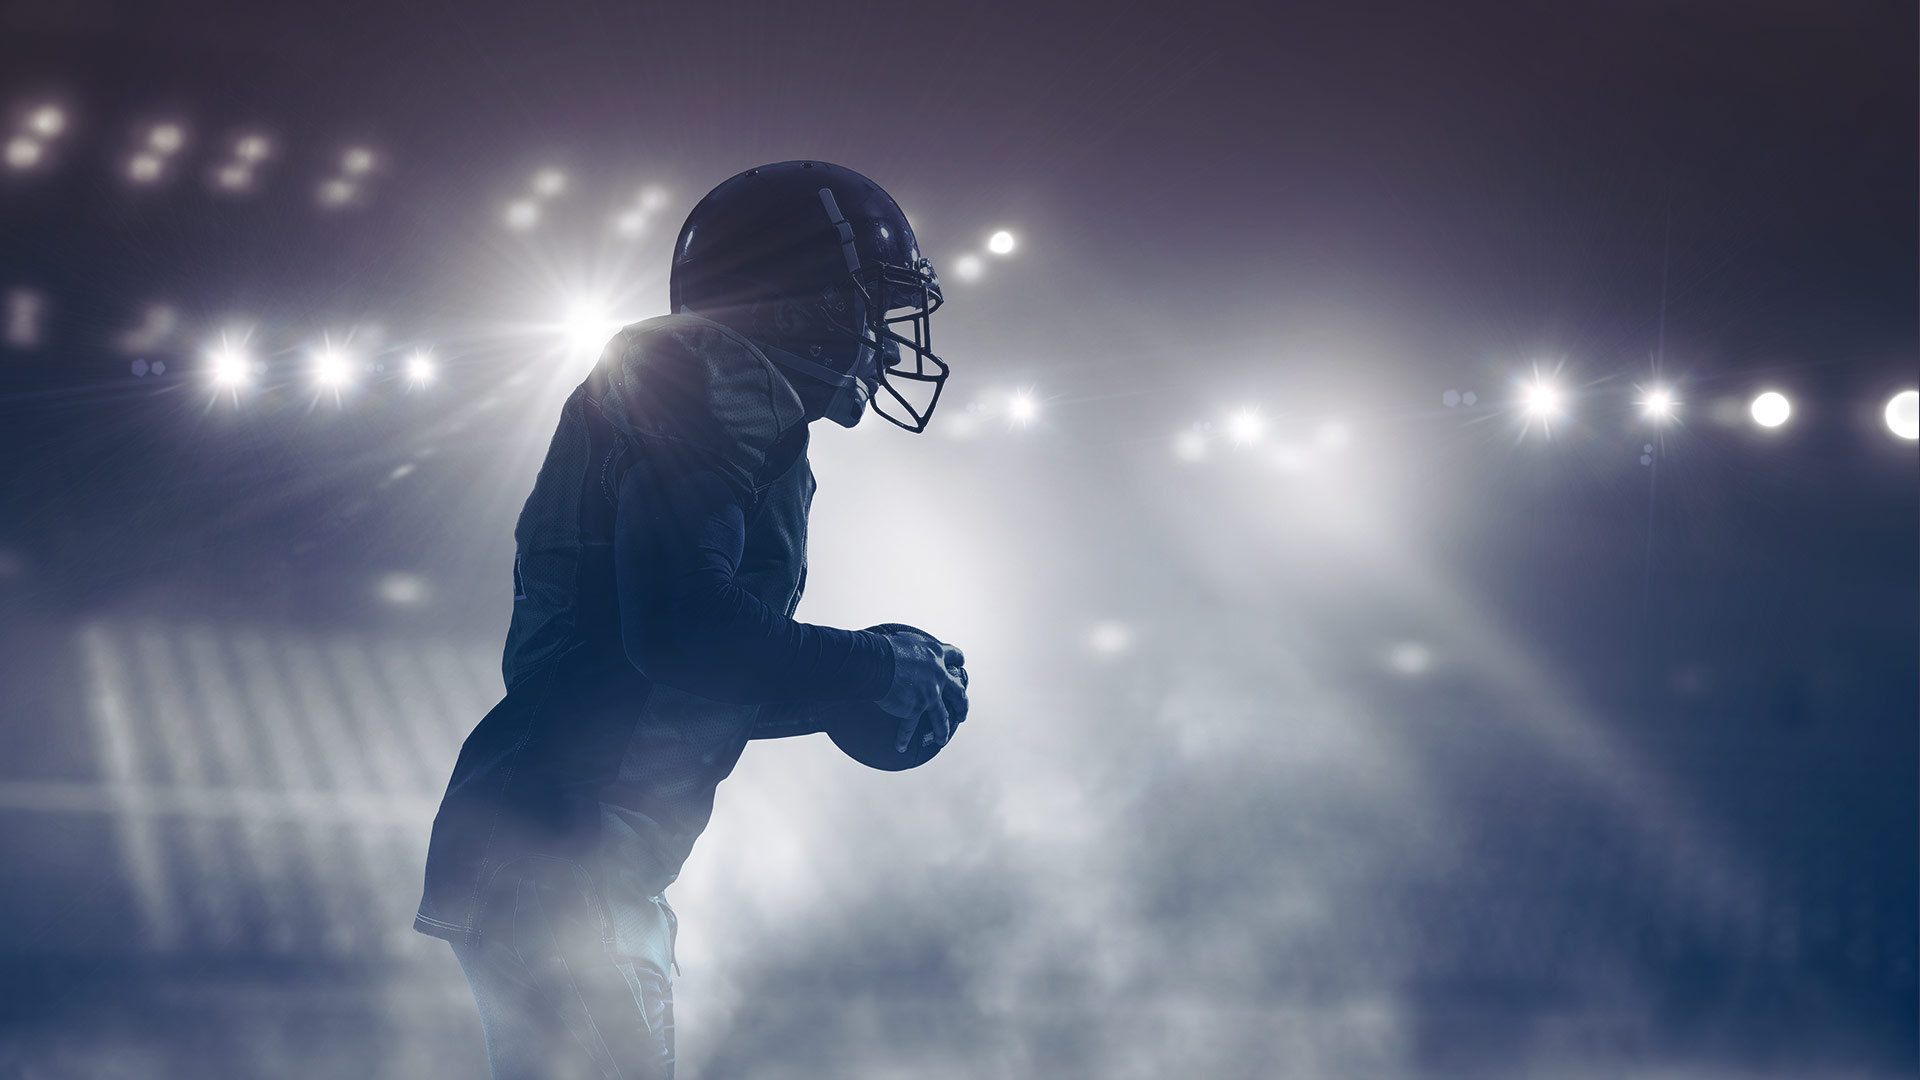 Profile of a football player under the stadium lights